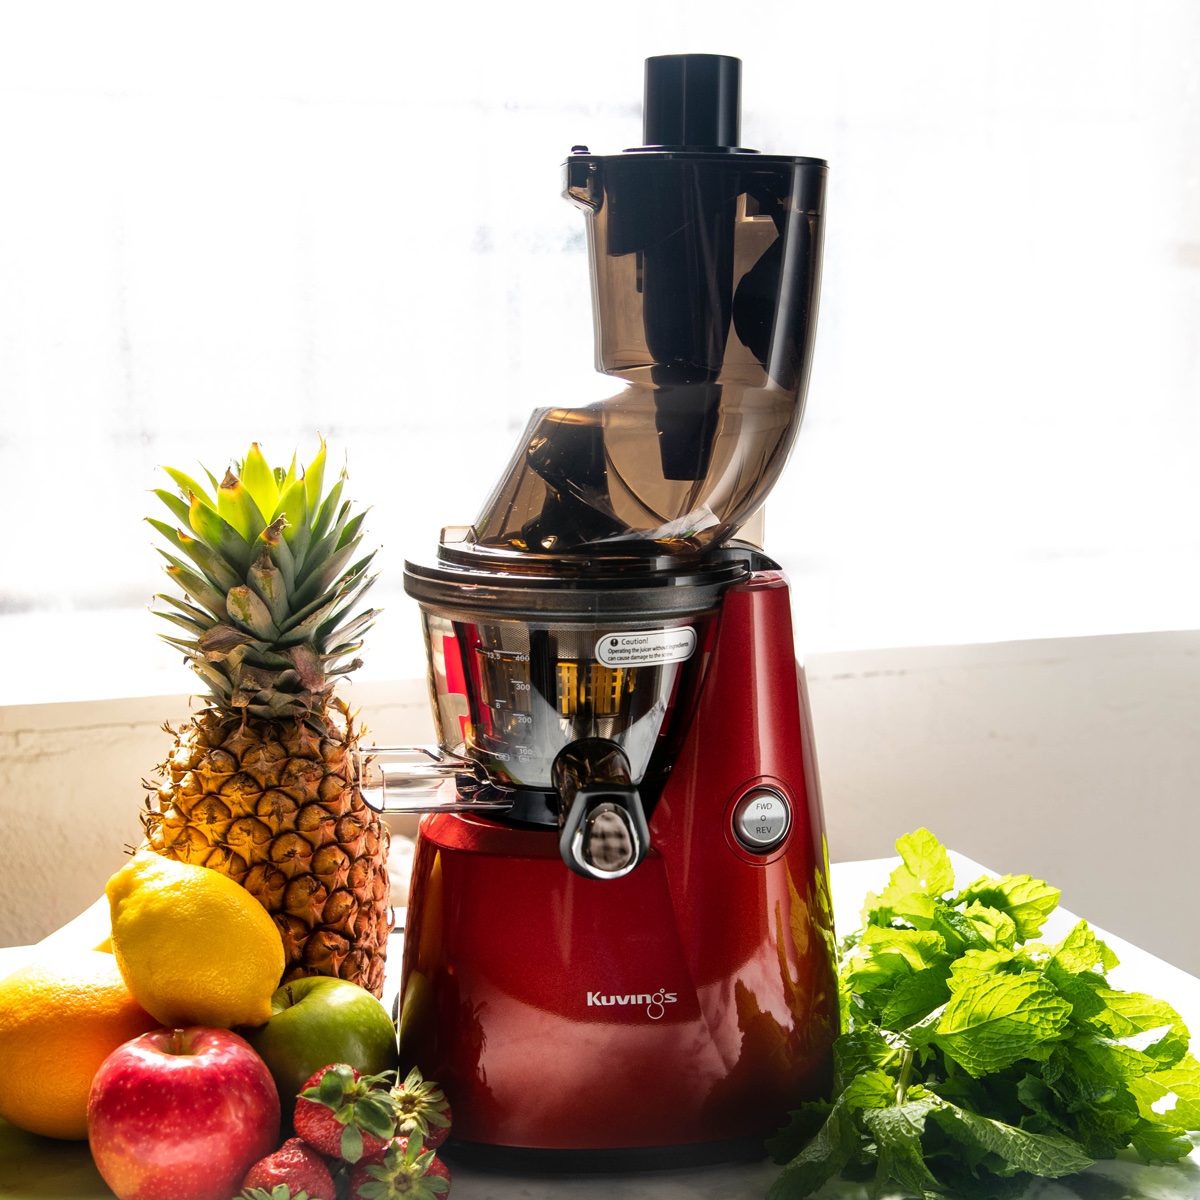 Where To Buy Kuvings Juicer